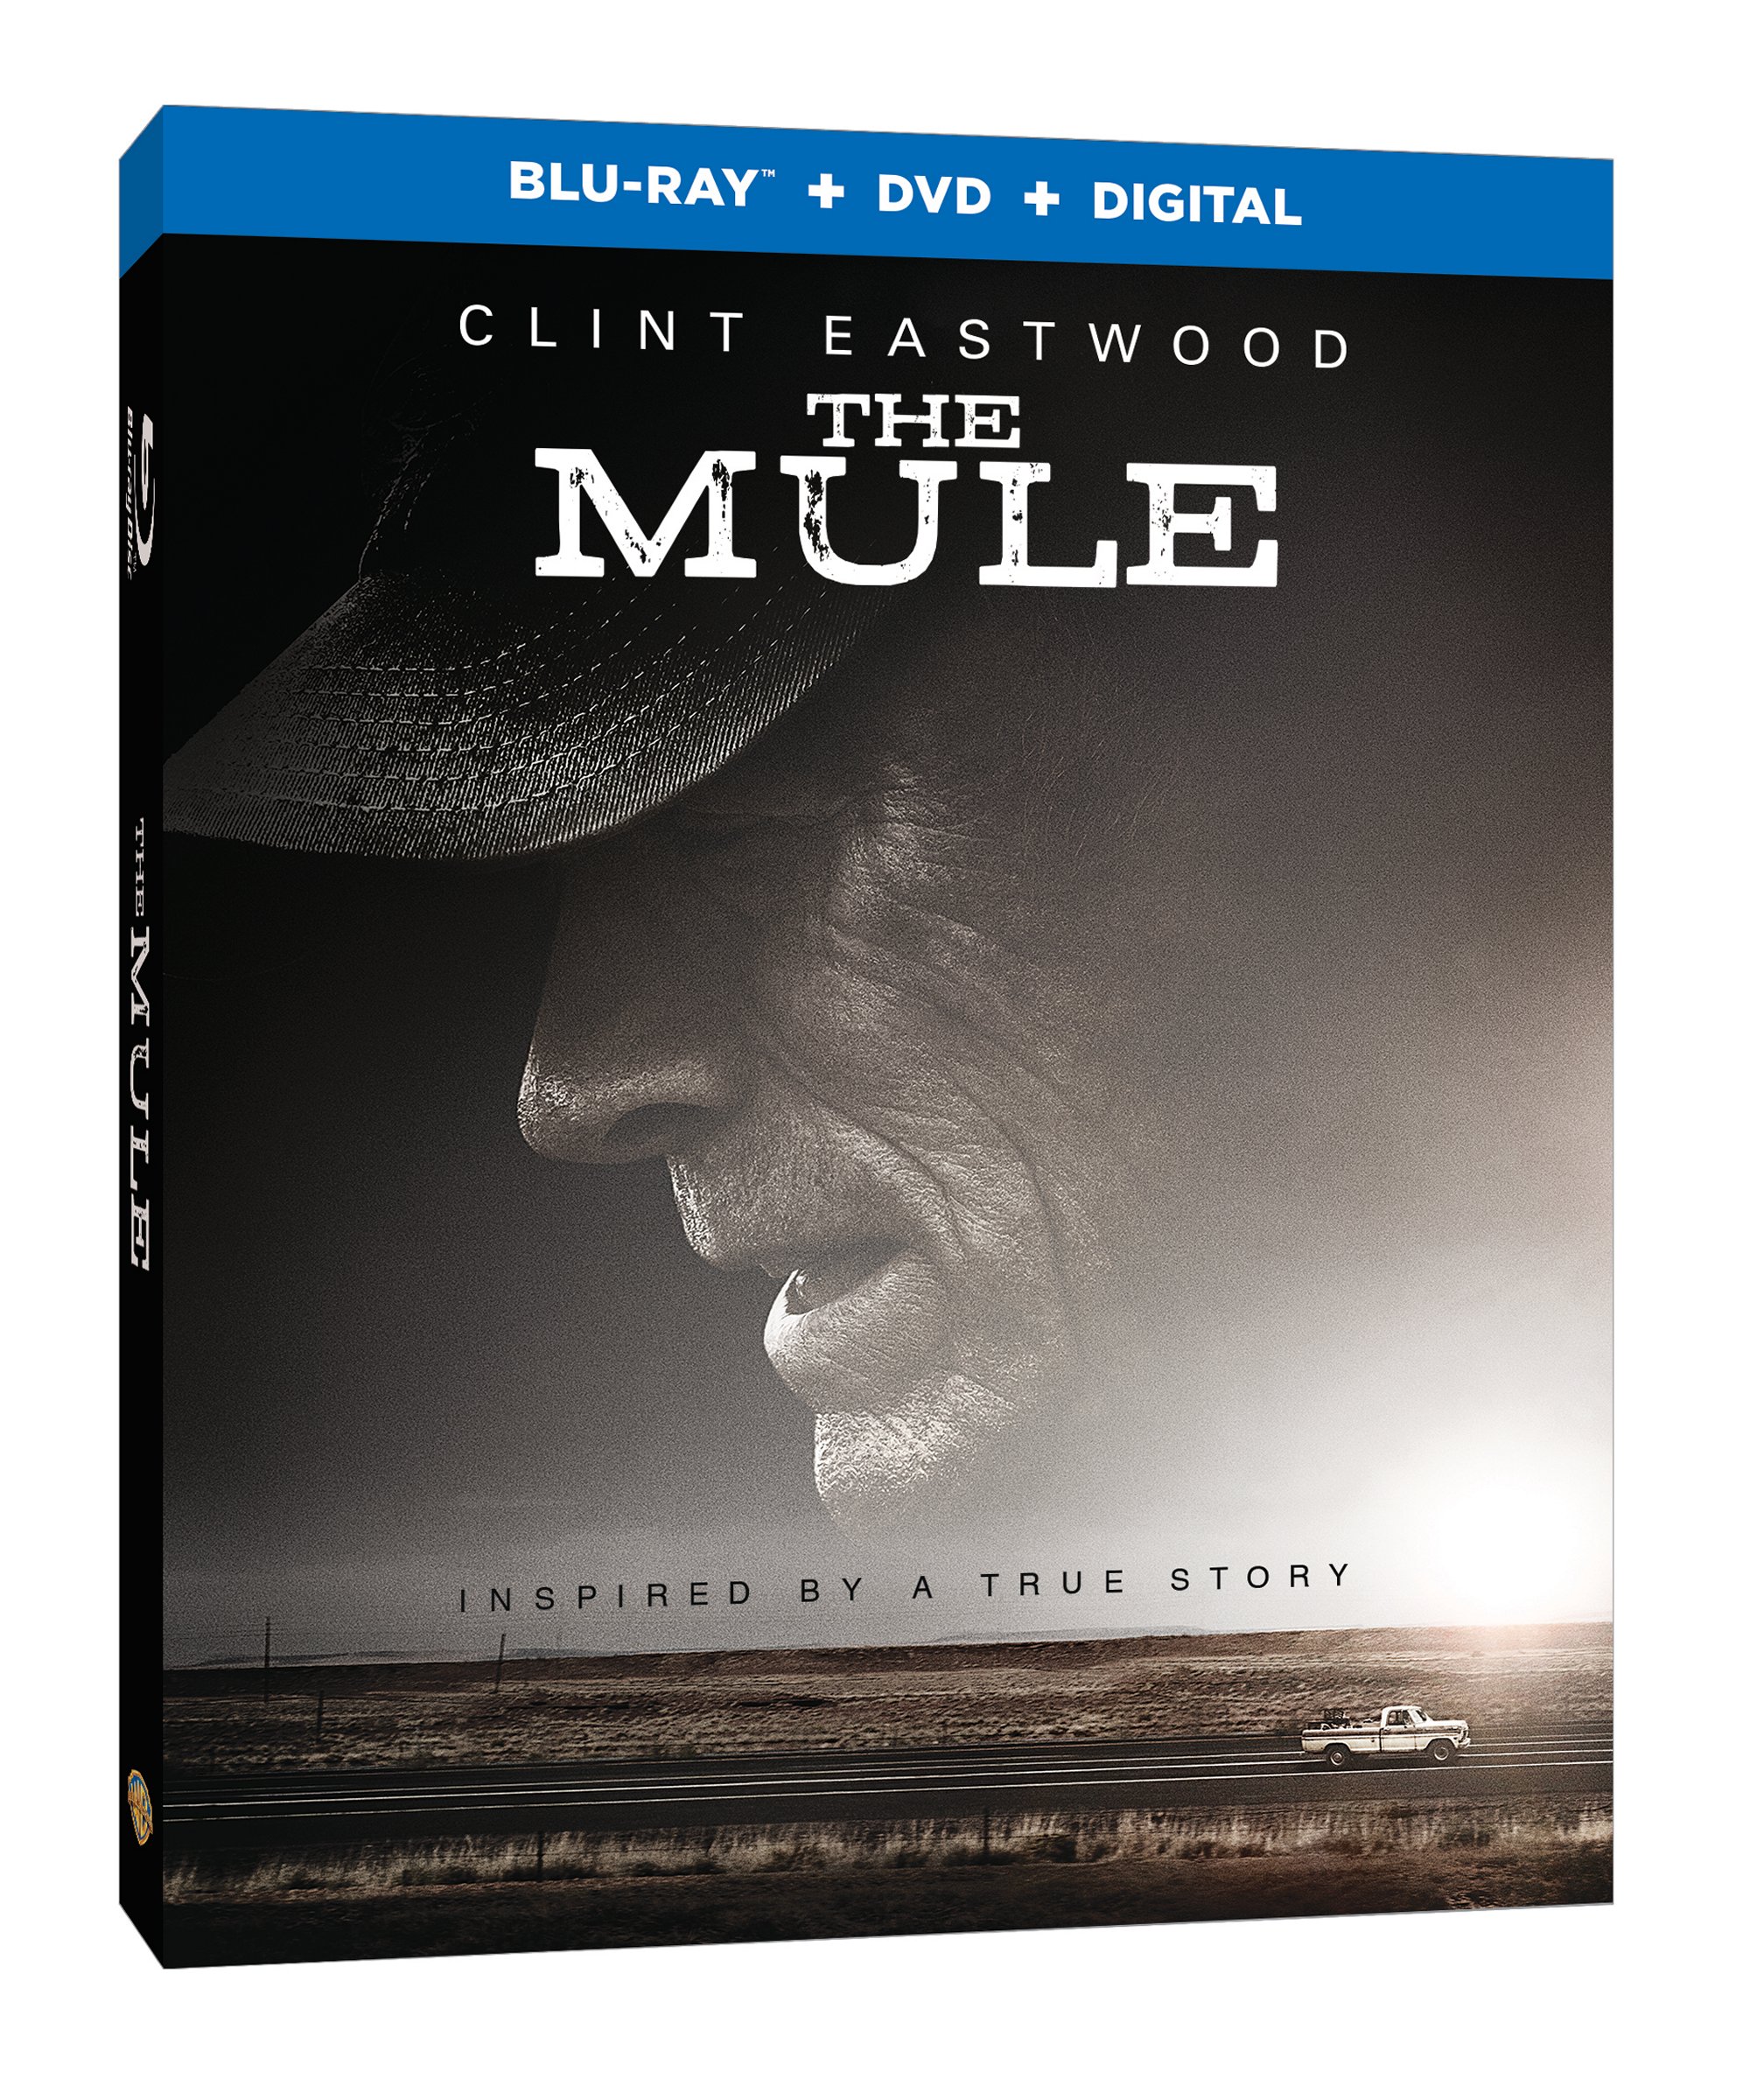 The Mule Blu-Ray Combo Pack cover (Warner Bros. Home Entertainment